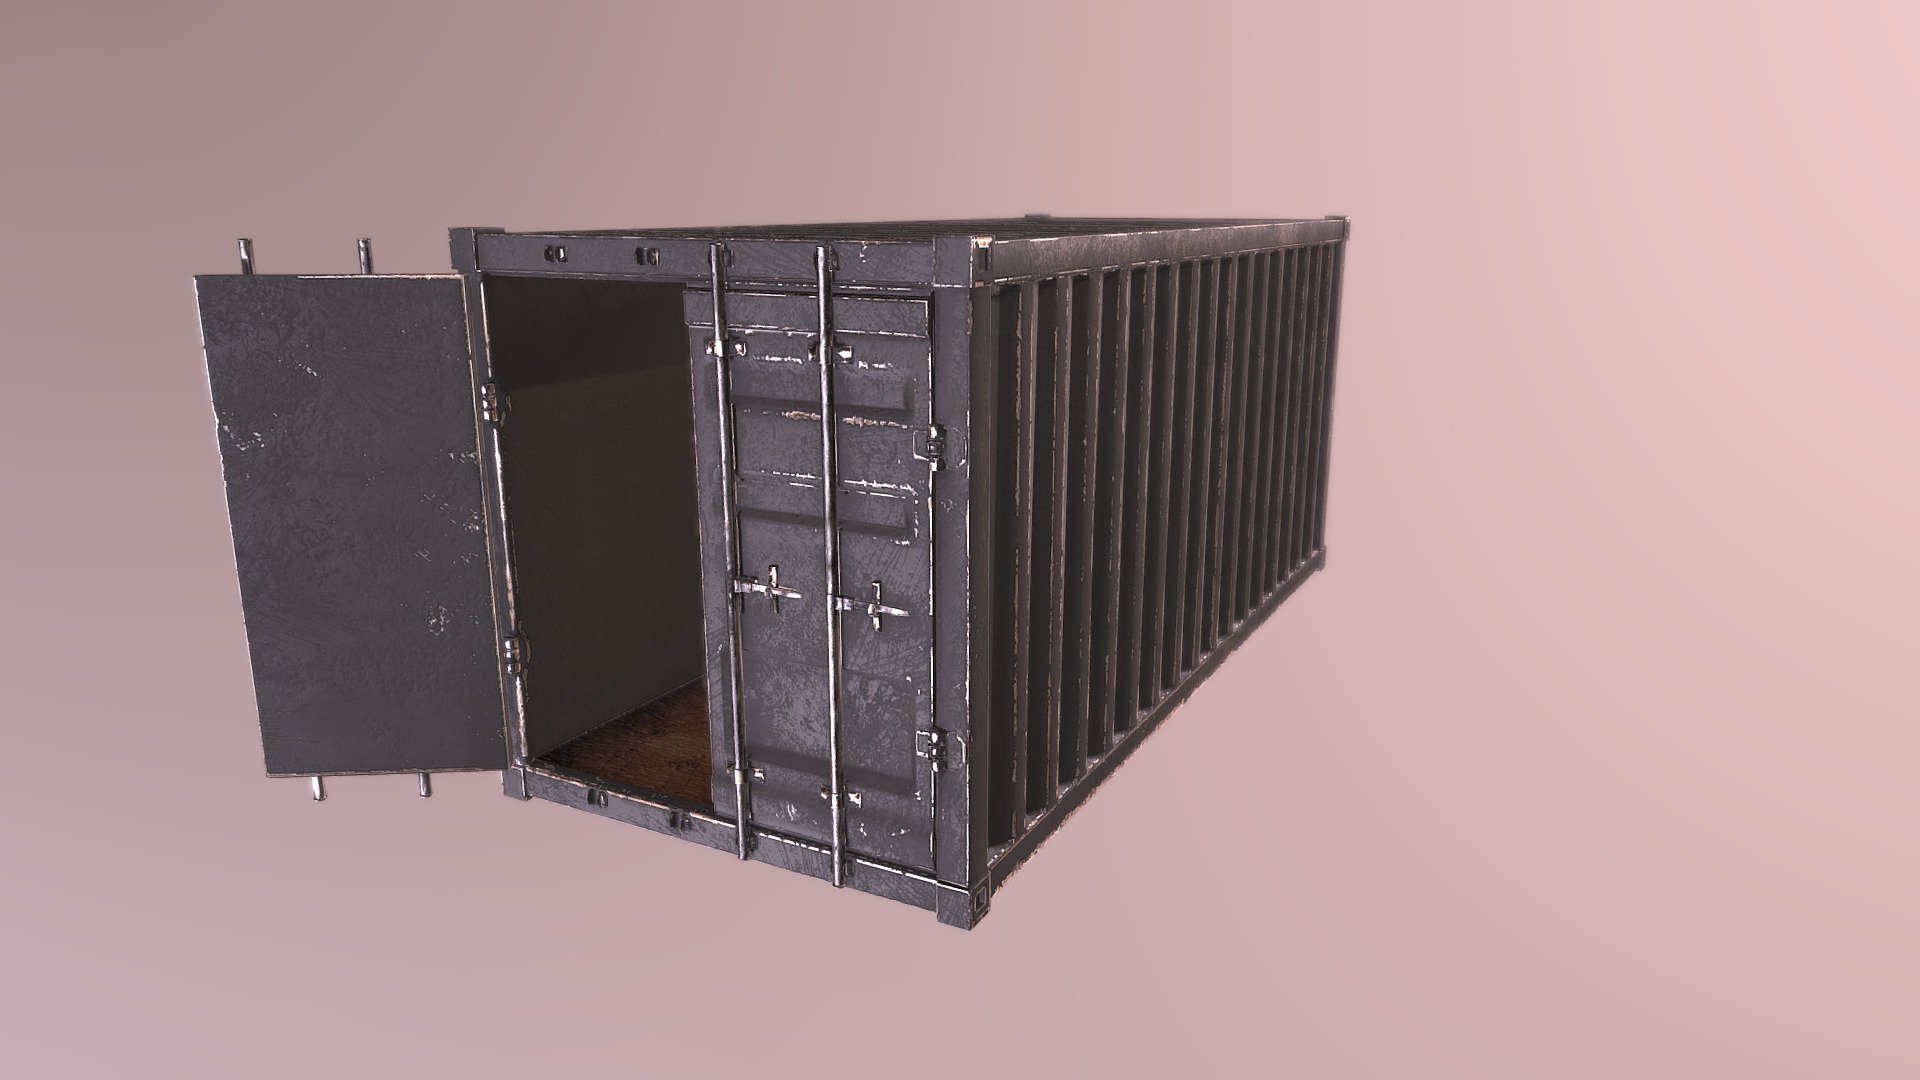 Your classic stock standard shipping container model, a staple asset for any video game production 3d model